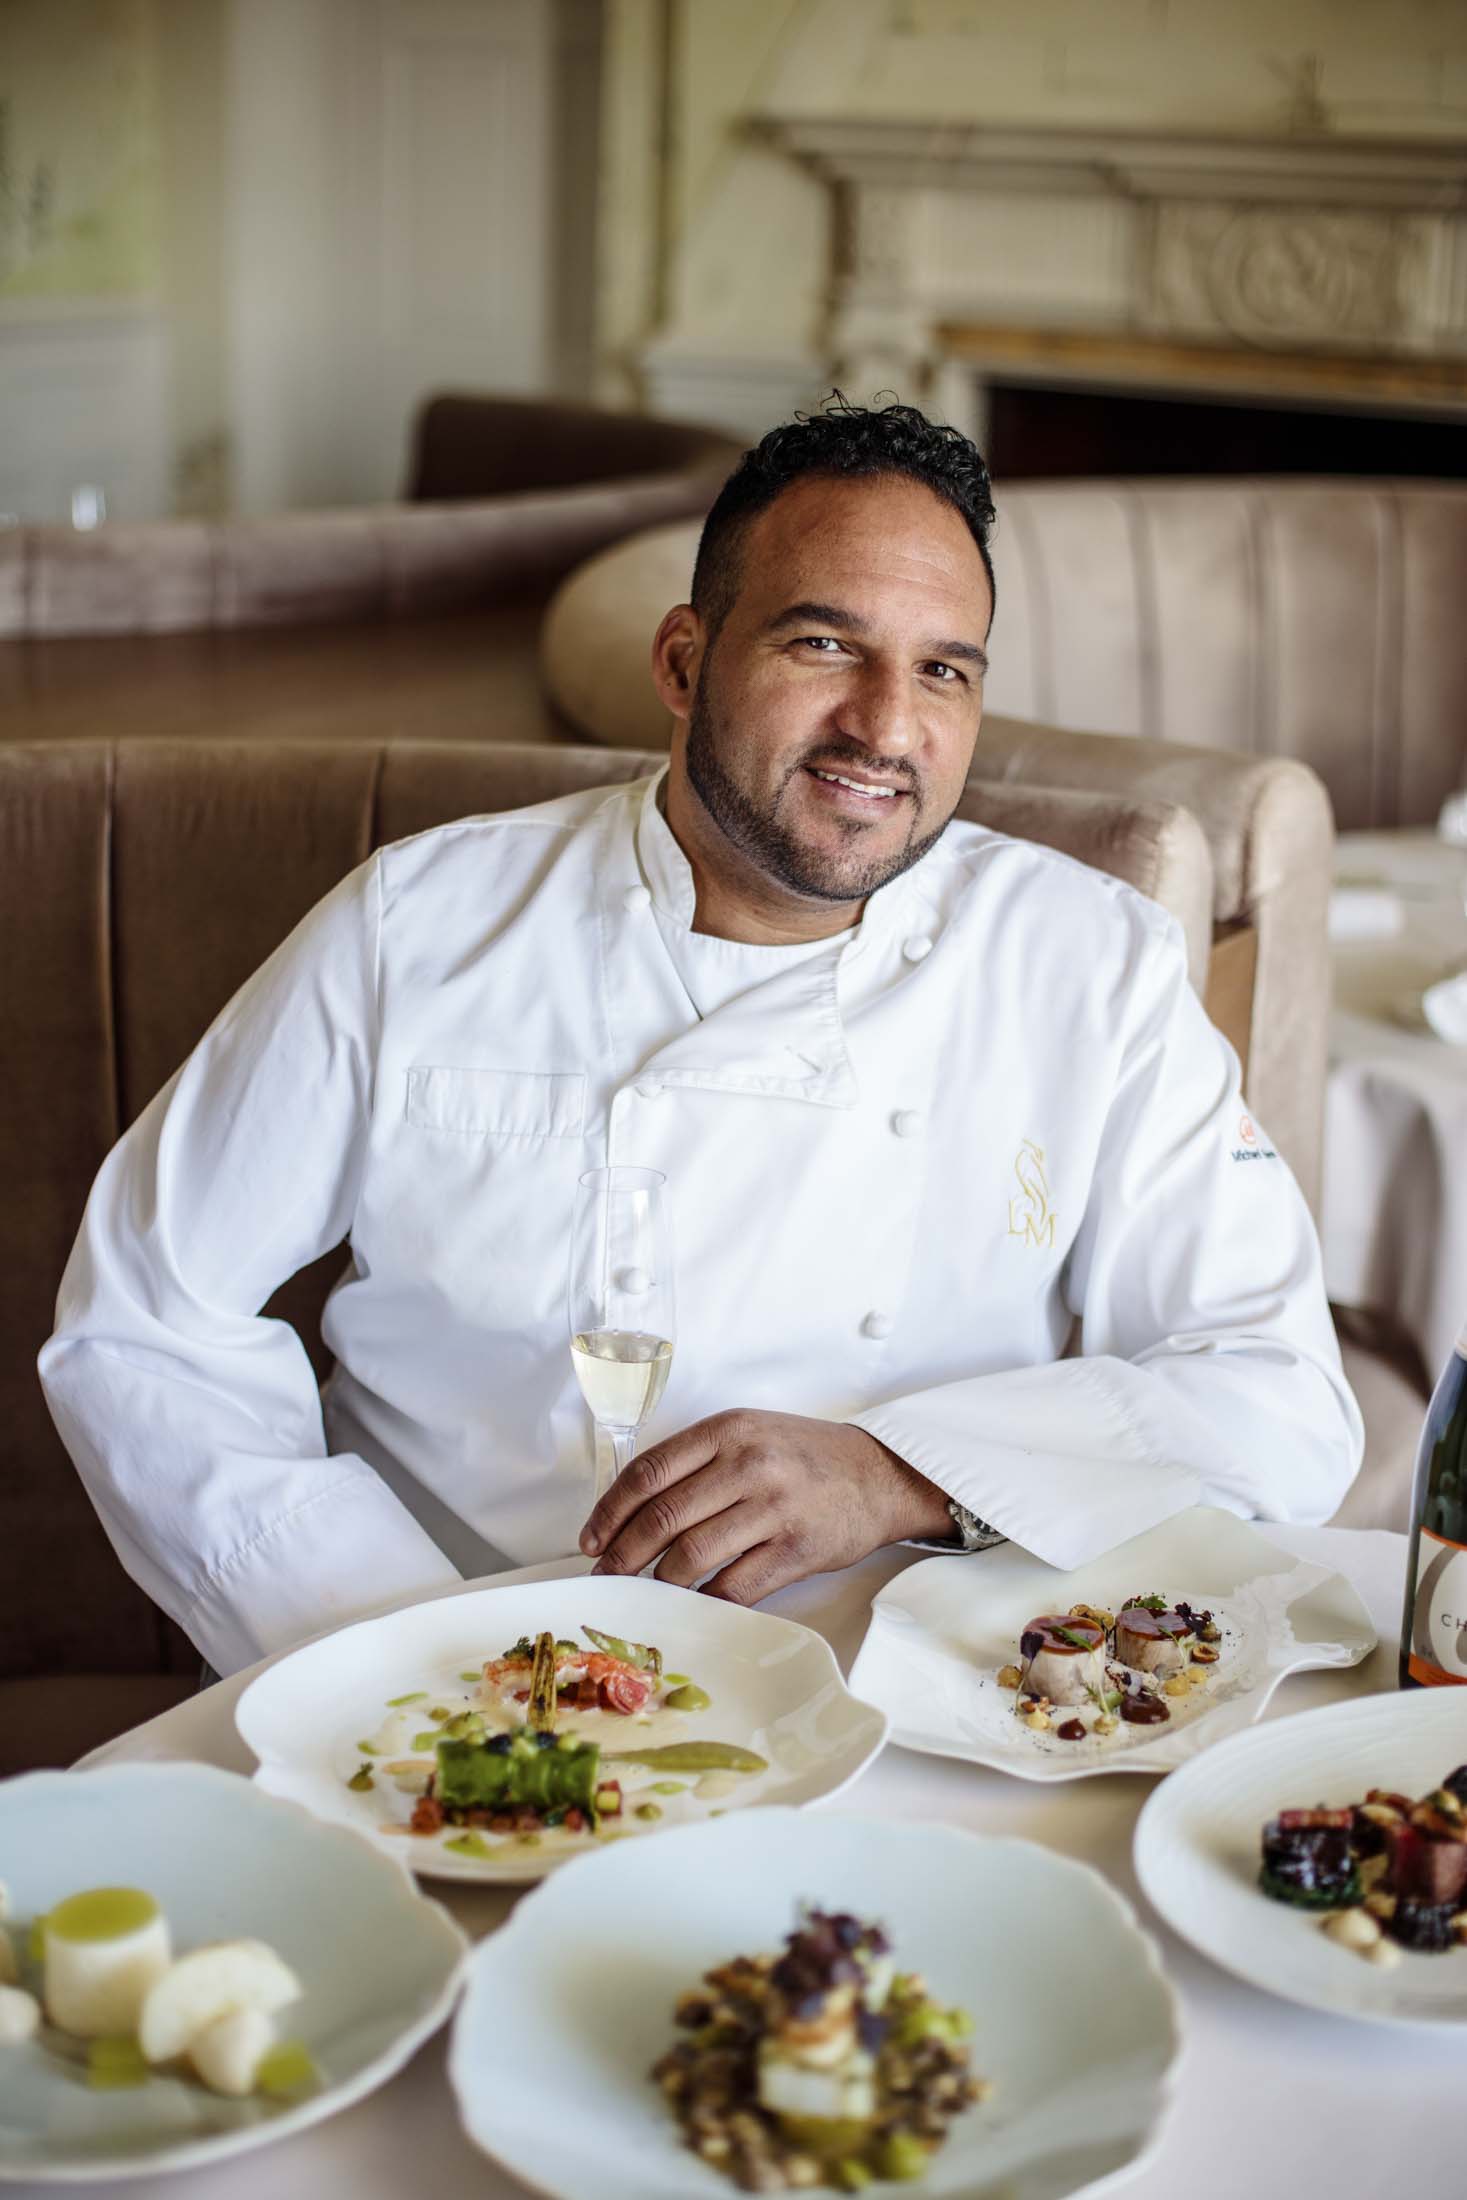 Michael Caines at Lympstone Manor in Exmouth in southern England.